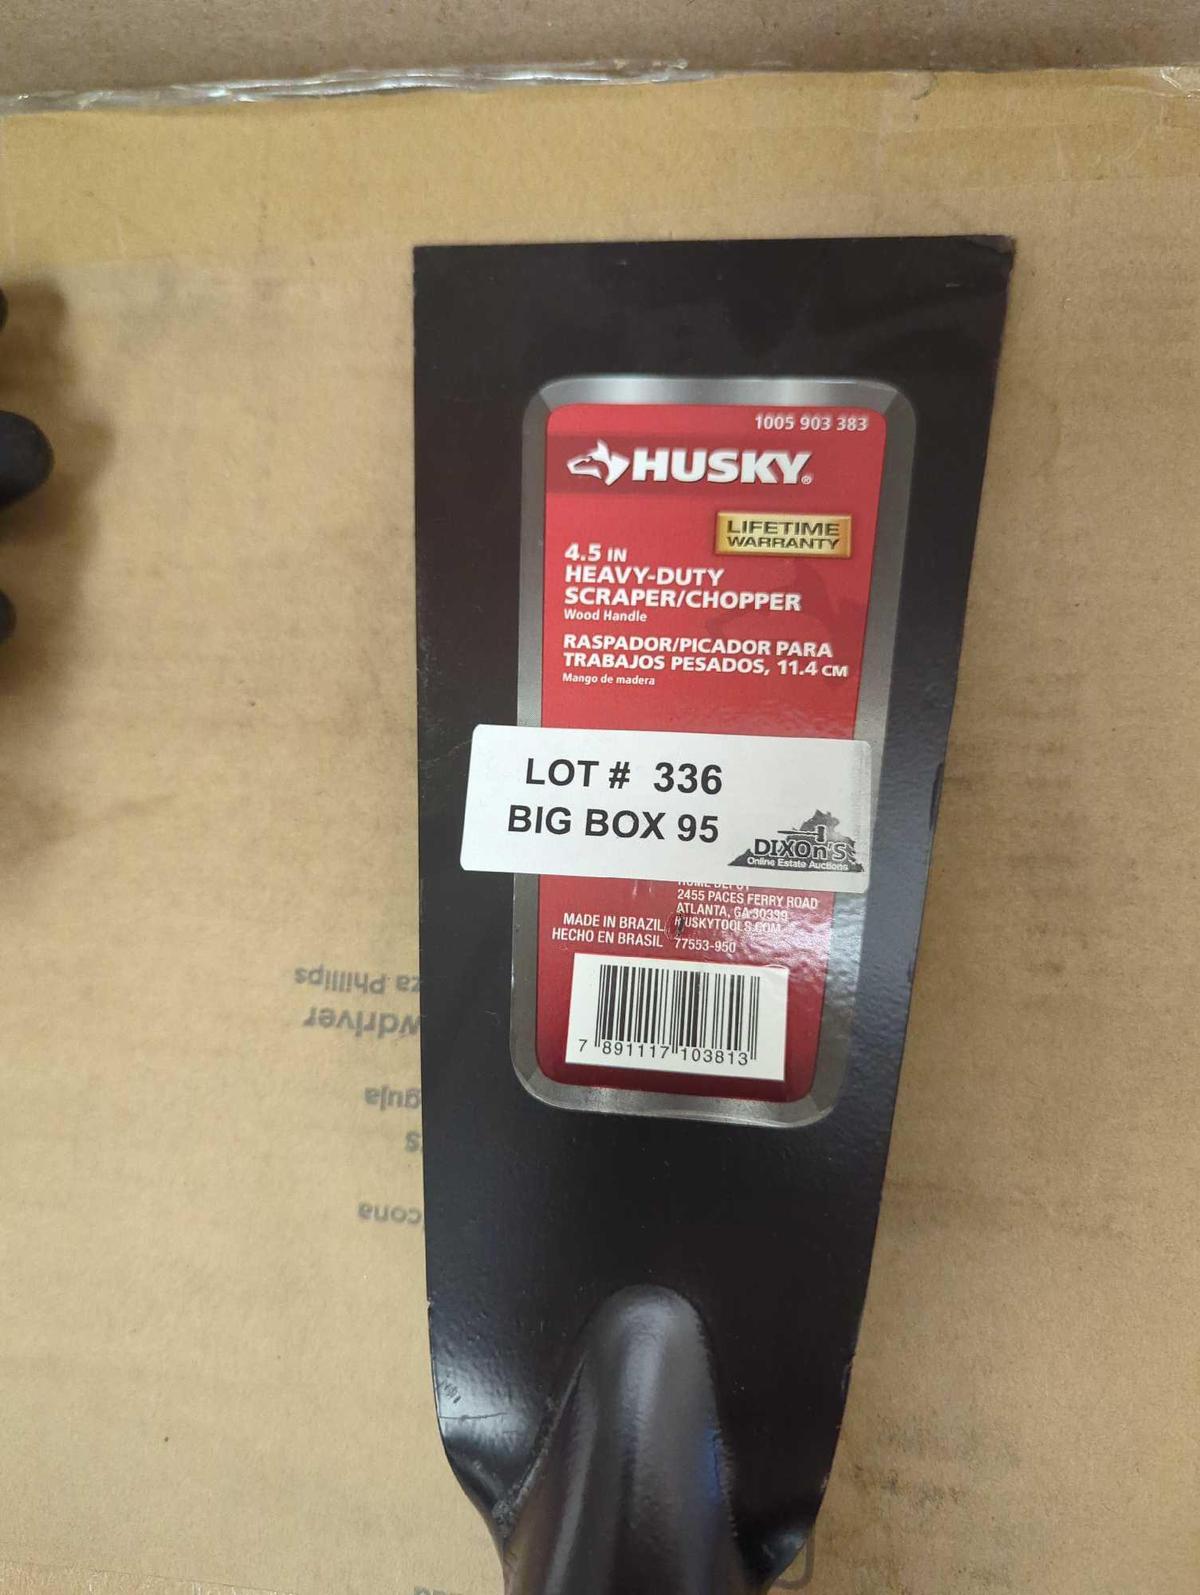 Husky 51 in. Carbon Steel Blade Ice Scraper, Appears to be New Retail Price Value $30, What you see